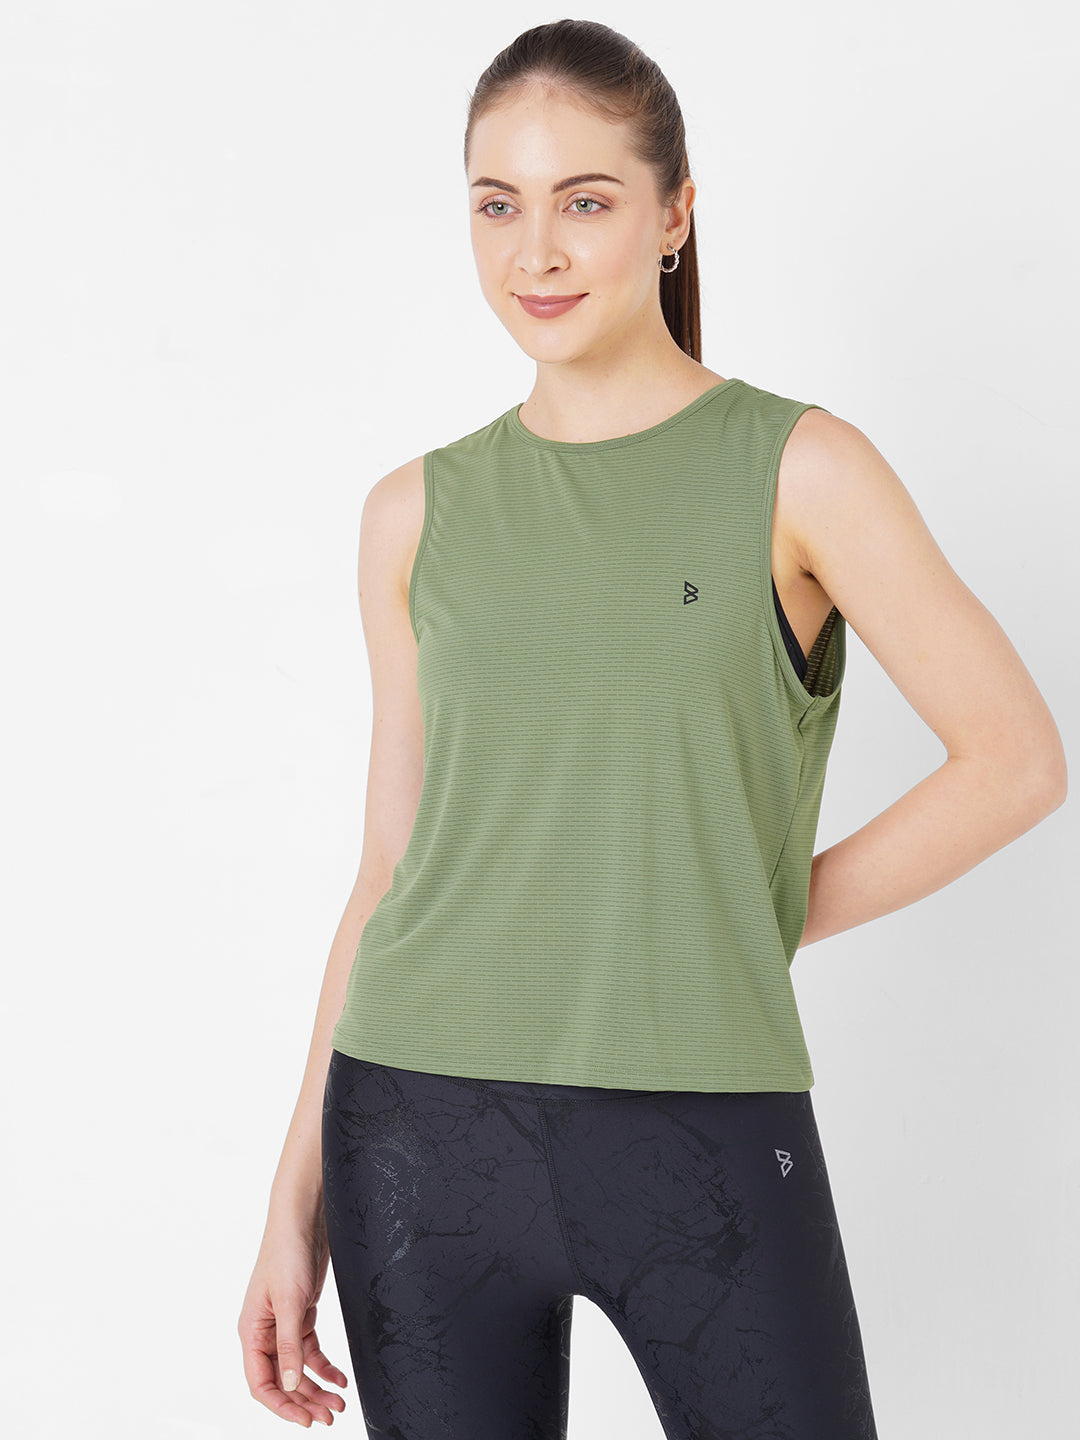 Green Olive Cut Out Tank boddactive.com